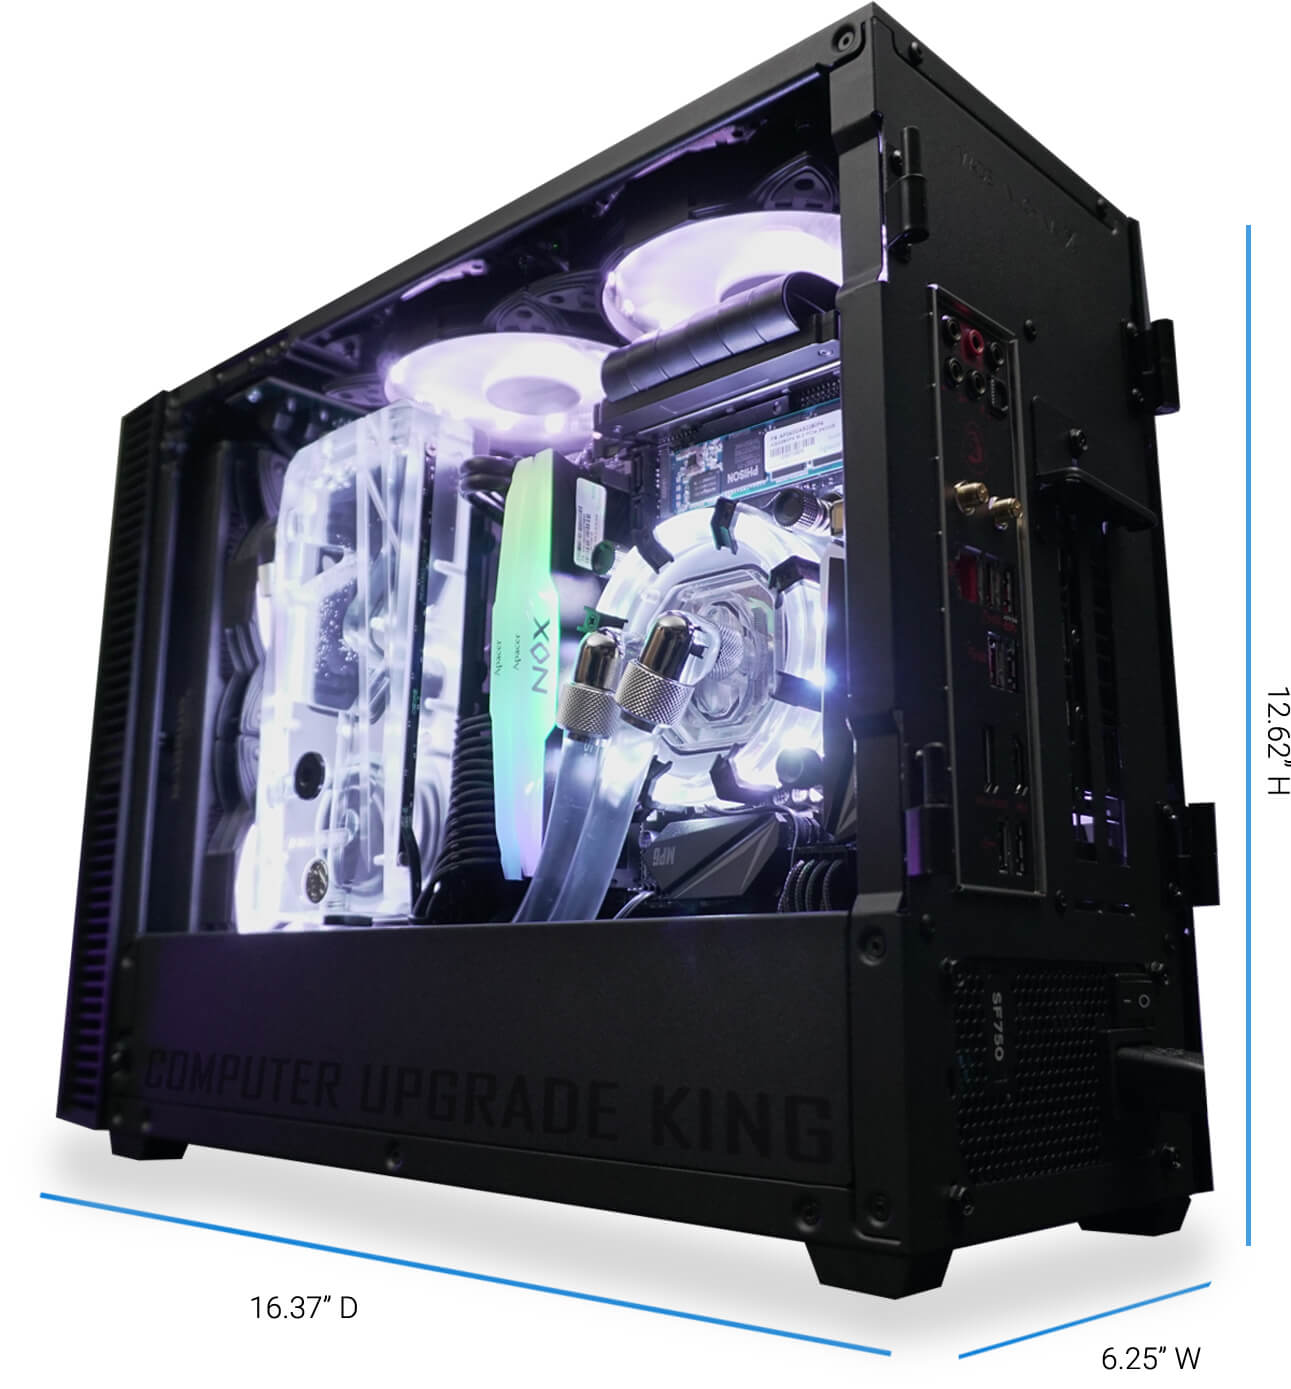 CUK Continuum Mini ITX fits full size components in a smaller space